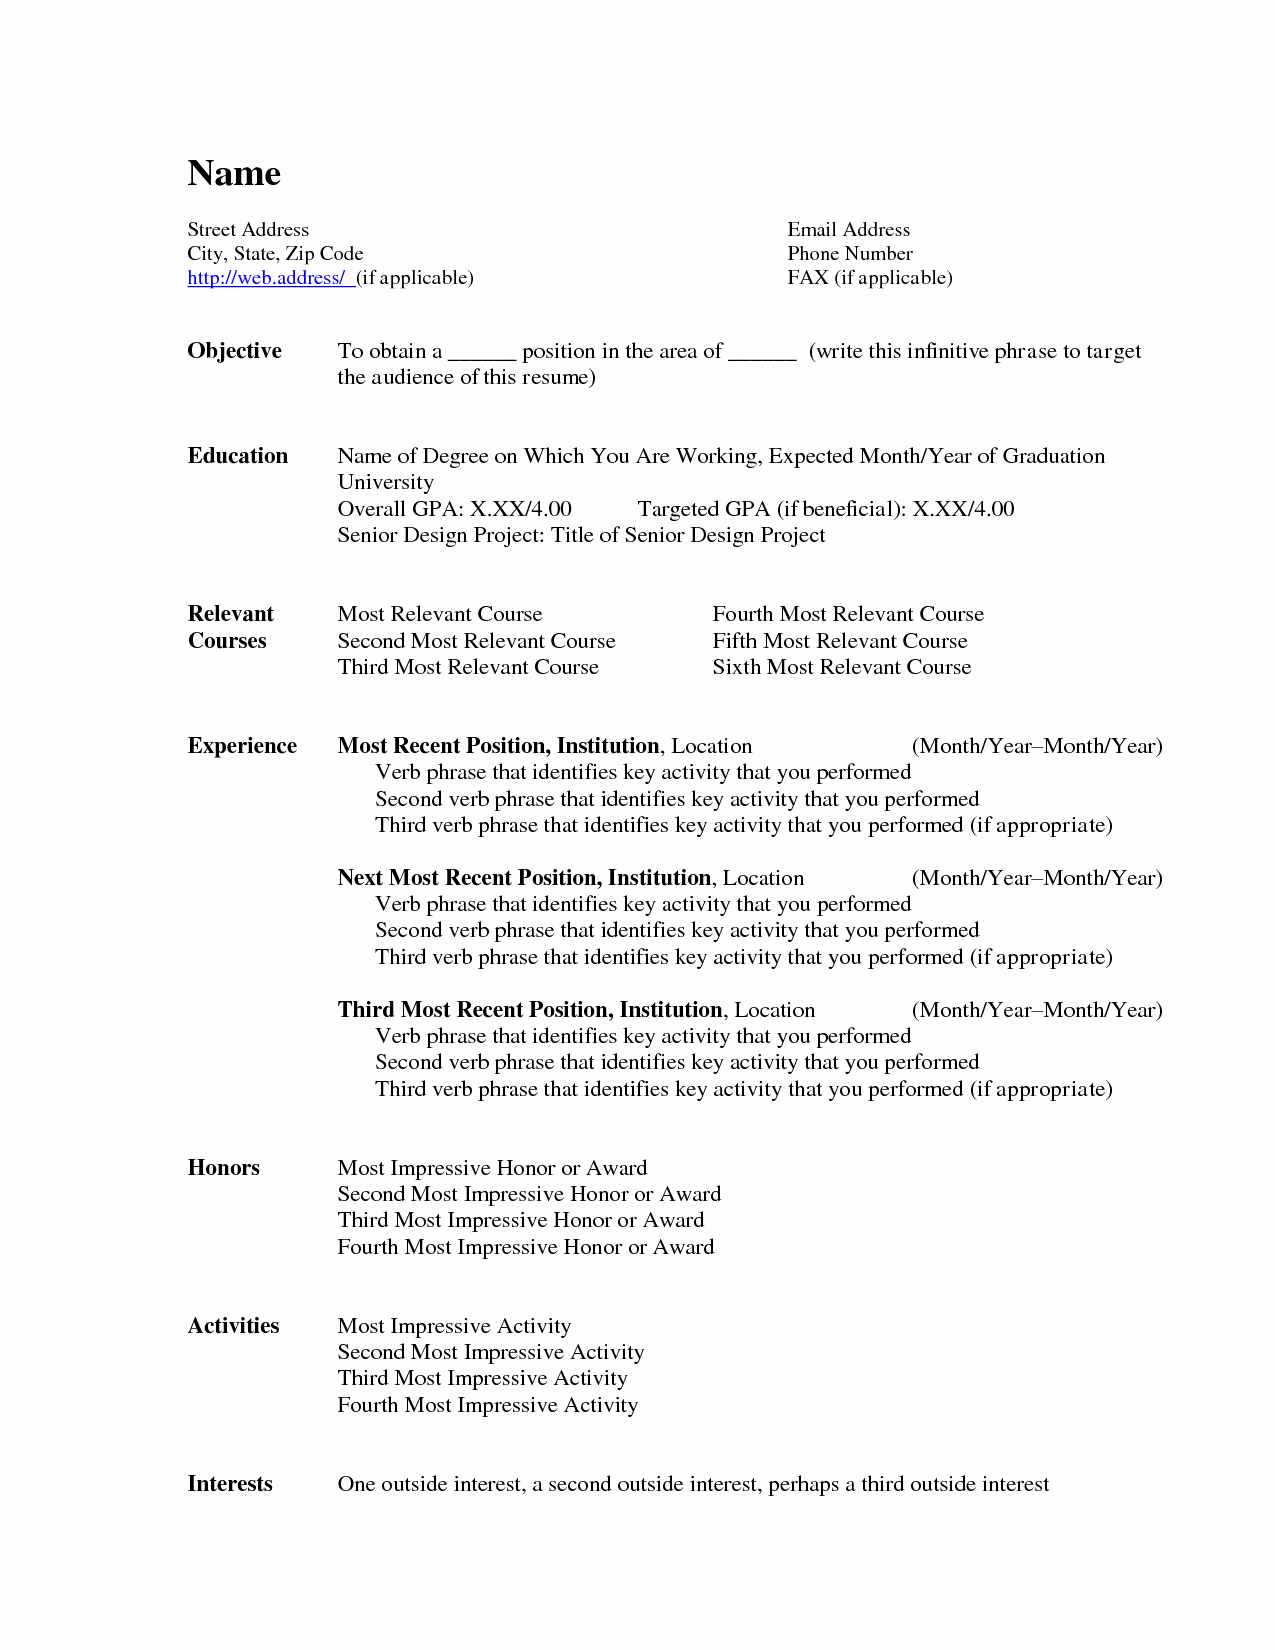 Resume format In Microsoft Word Inspirational is there A Resume Resumes Microsoft Word Popular Resume